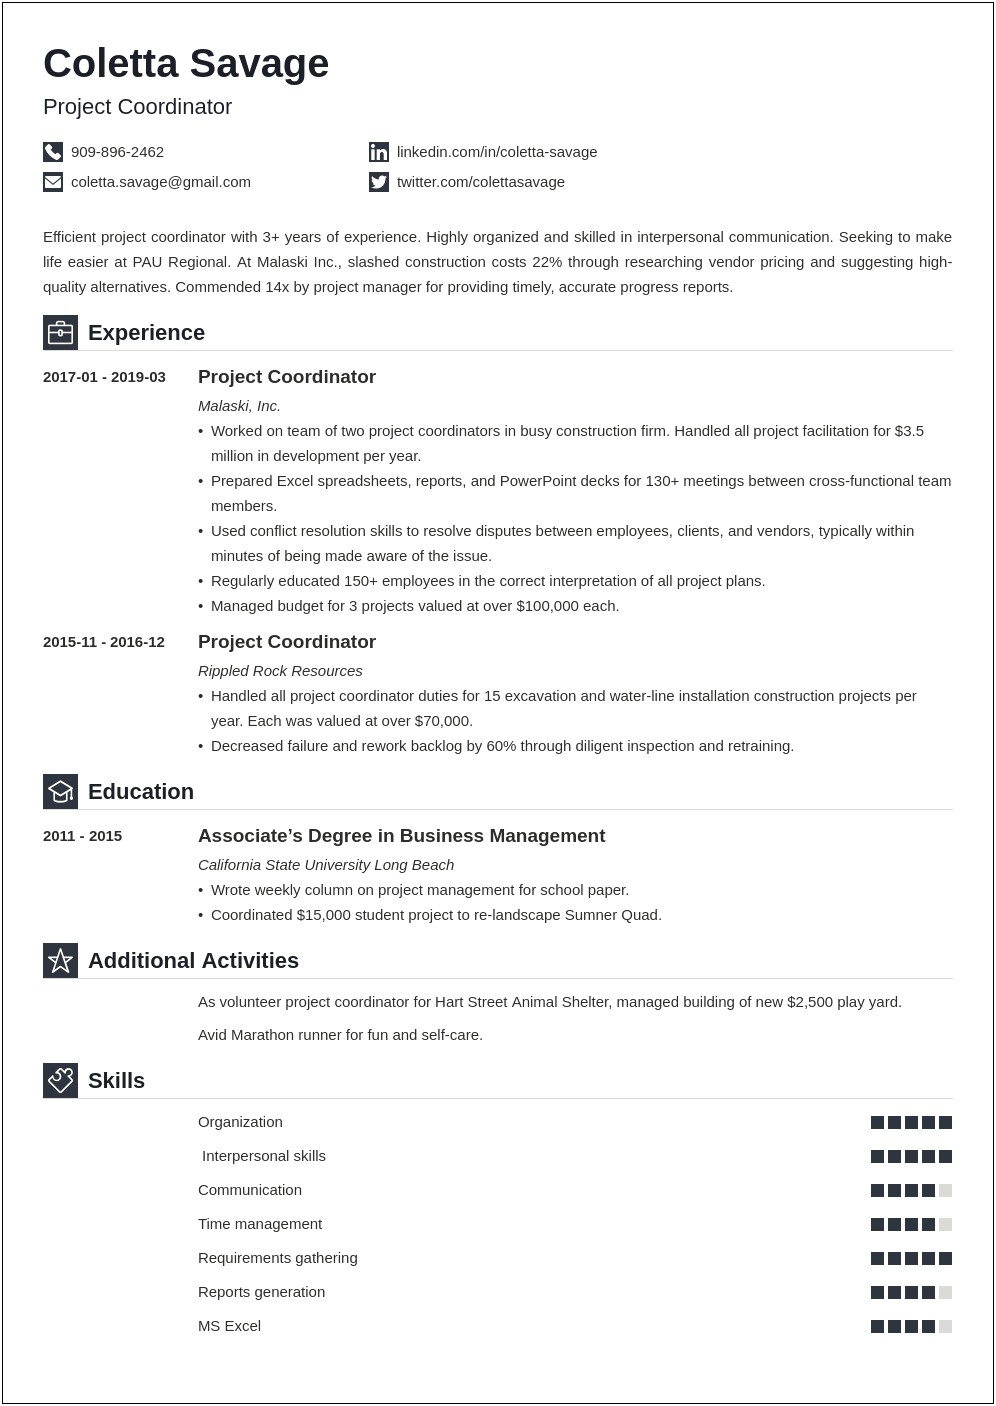 Sample Resume For Student Services Coordinator